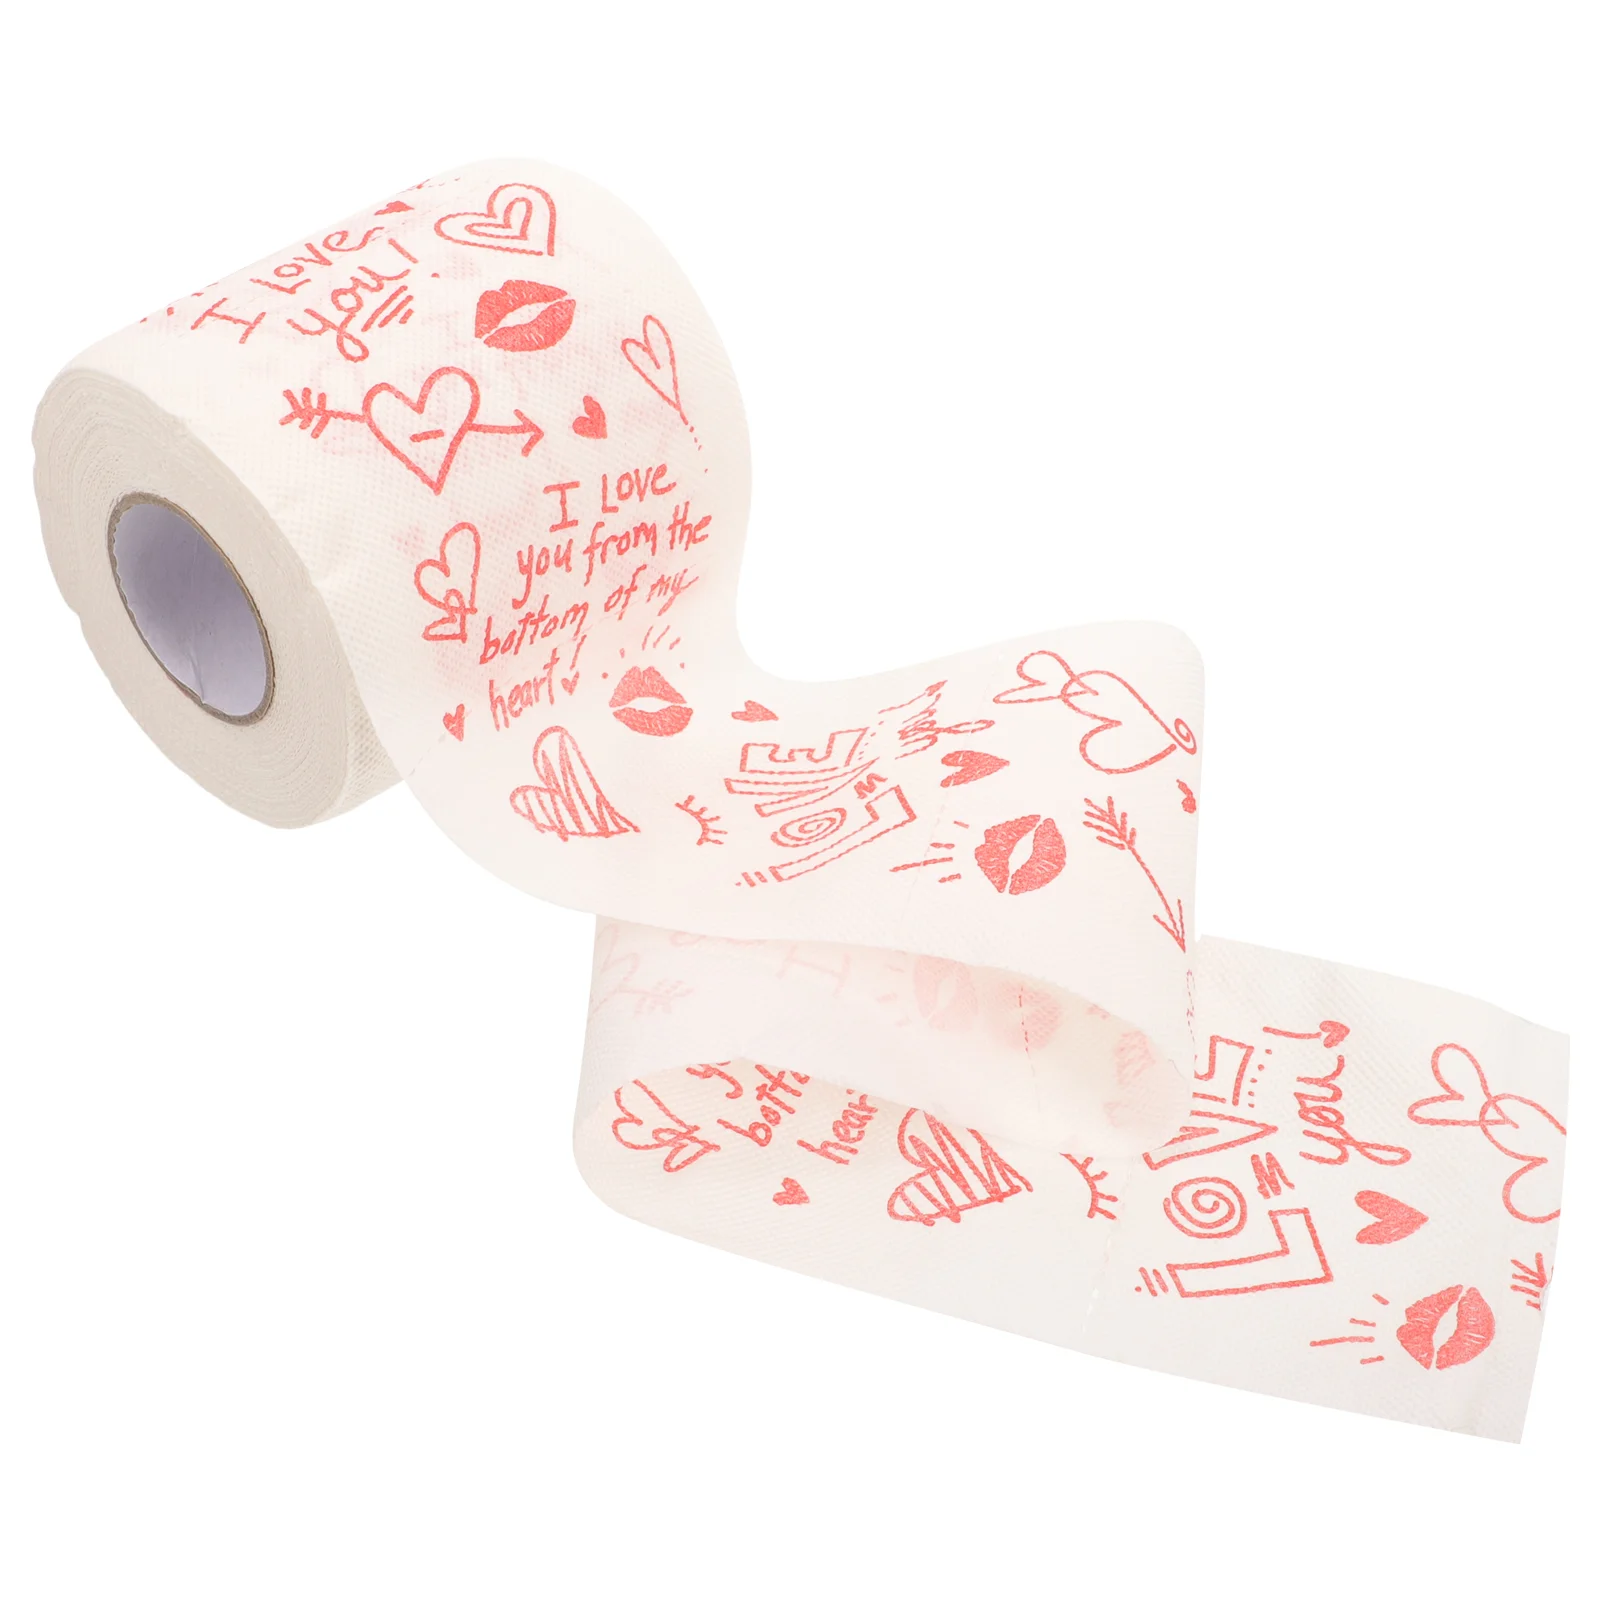 

Printed Tissue Valentines Day Decor Home Commercial Paper Towels Soft Toilet Printing Party Supplies Table Napkins